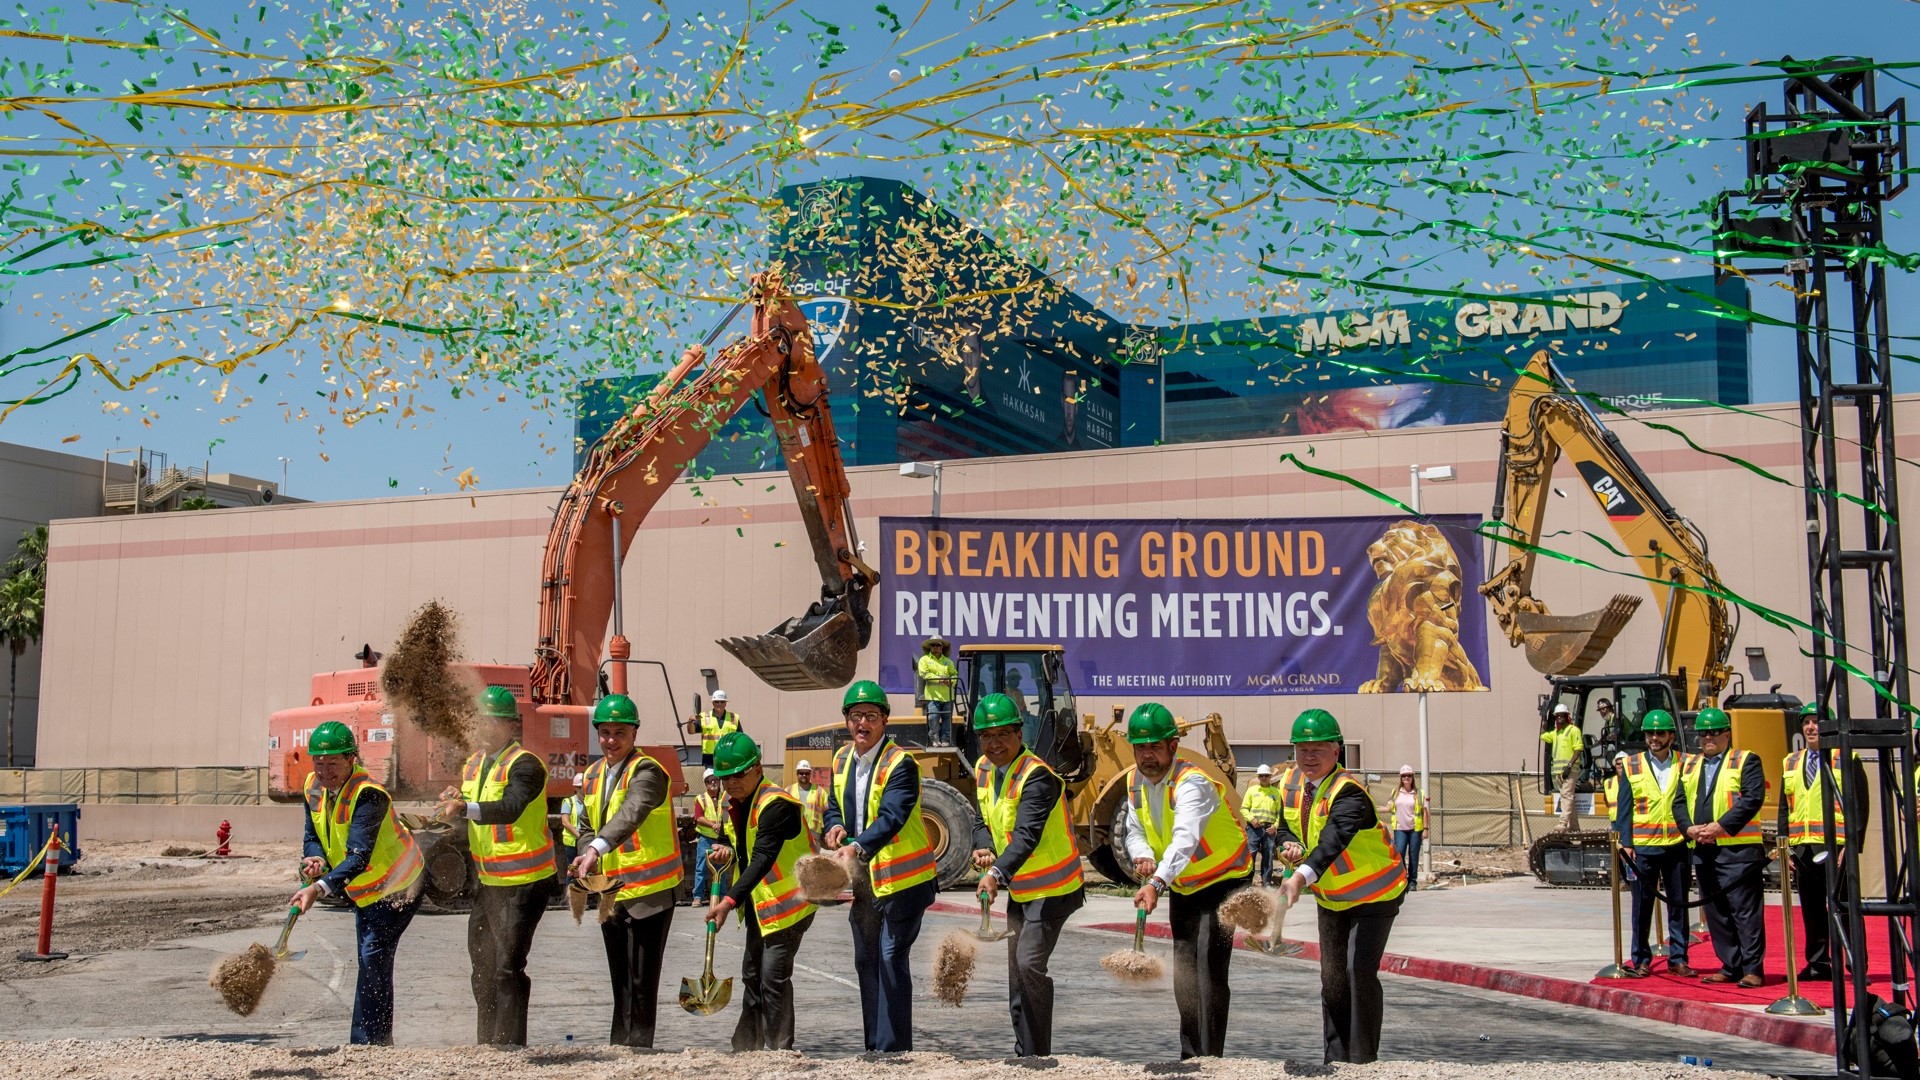 MGM Grand Breaks Ground on Conference Center and Stay Well Meetings Expansion